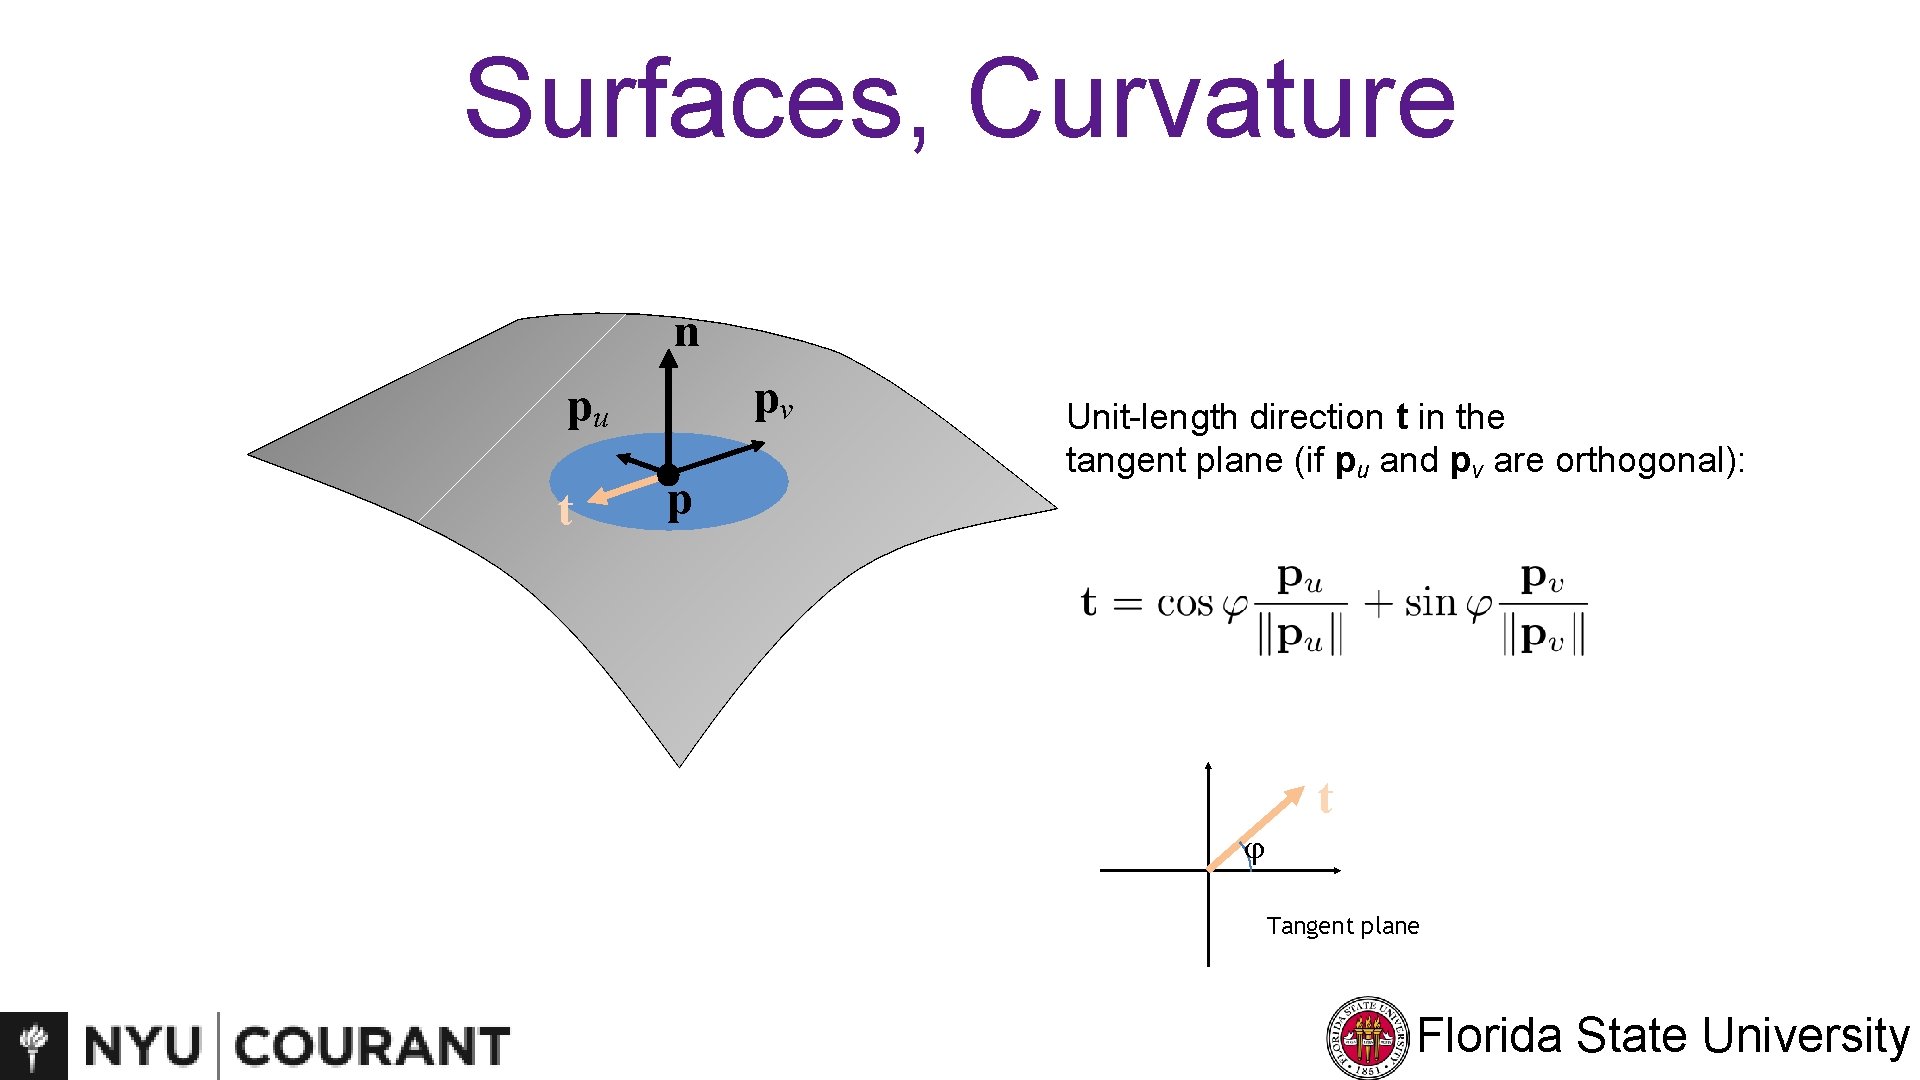 Surfaces, Curvature n pv pu t p Unit-length direction t in the tangent plane